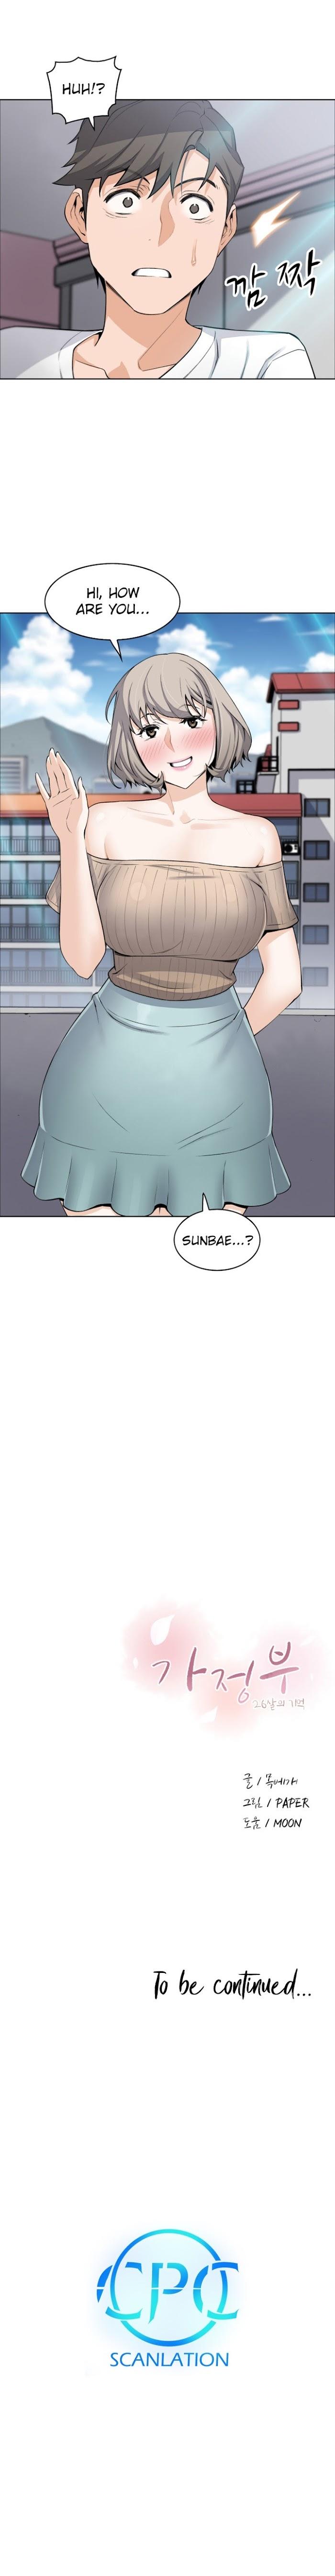 Housekeeper [Neck Pillow, Paper] Ch.49/49 [English] [Manhwa PDF] Completed 185